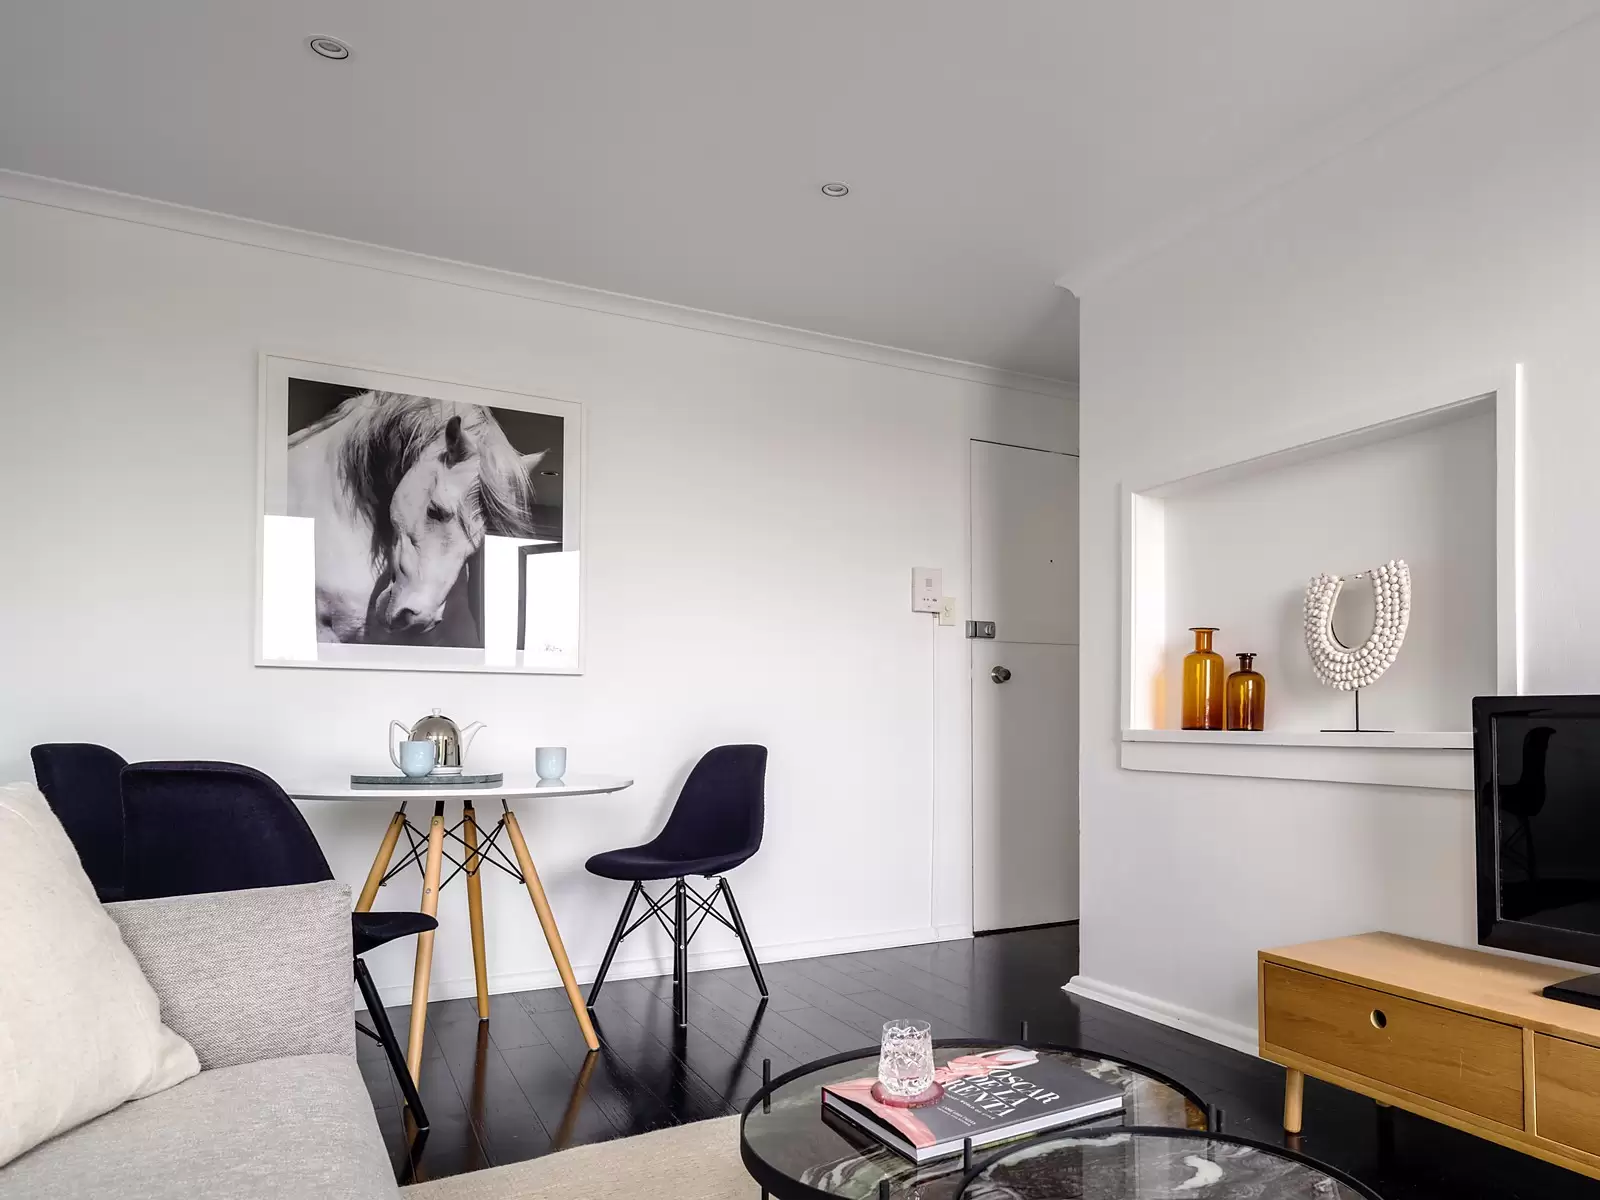 Photo #3: 50/679 Bourke Street, Surry Hills - Sold by Sydney Sotheby's International Realty